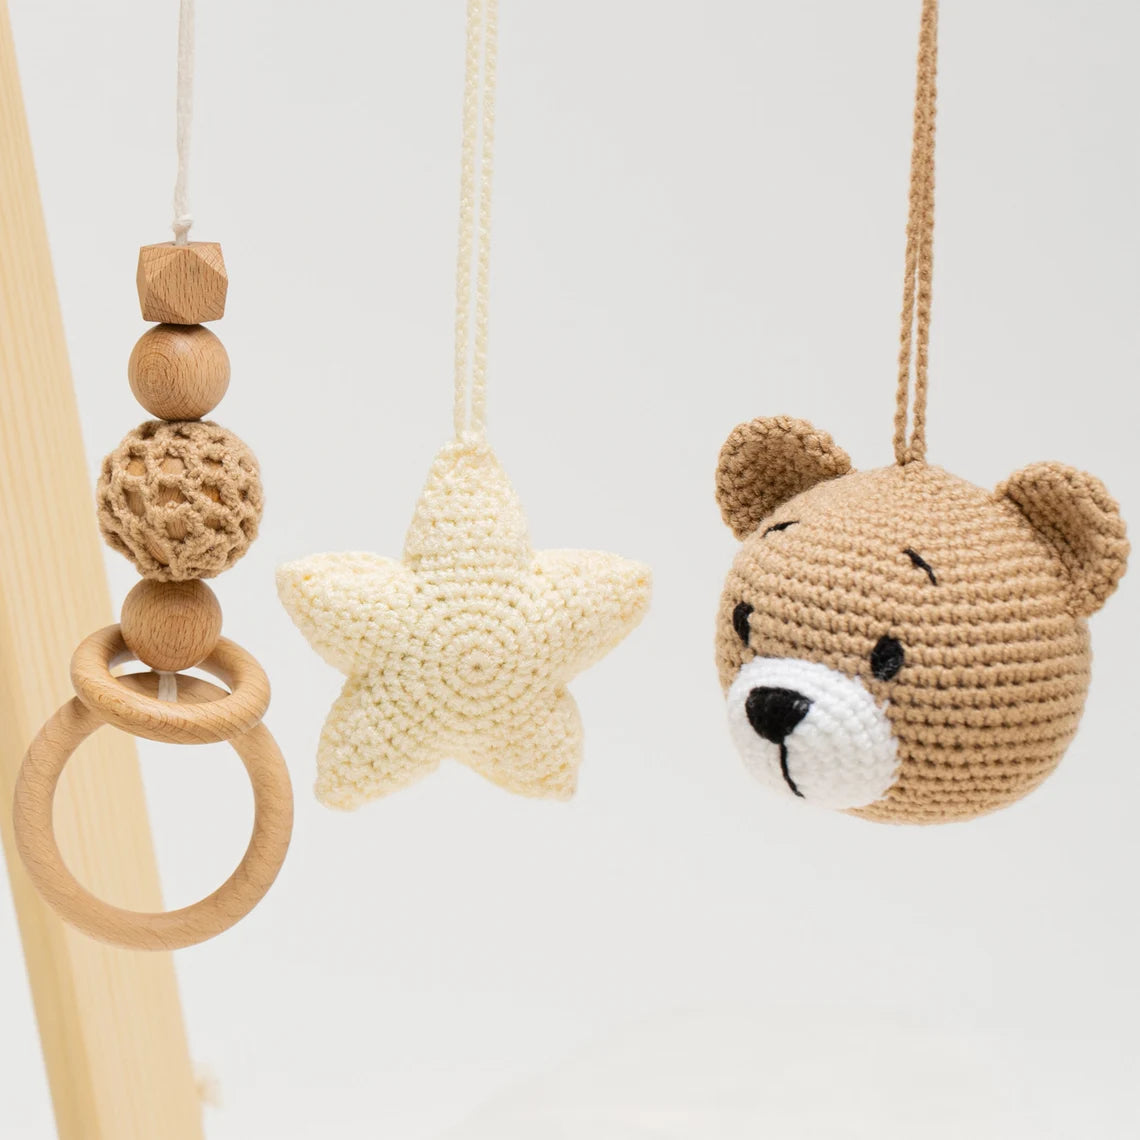 Activity Baby Play Gym, Wooden Toys With Handmade Hanging Crochet by KindWoodPecker